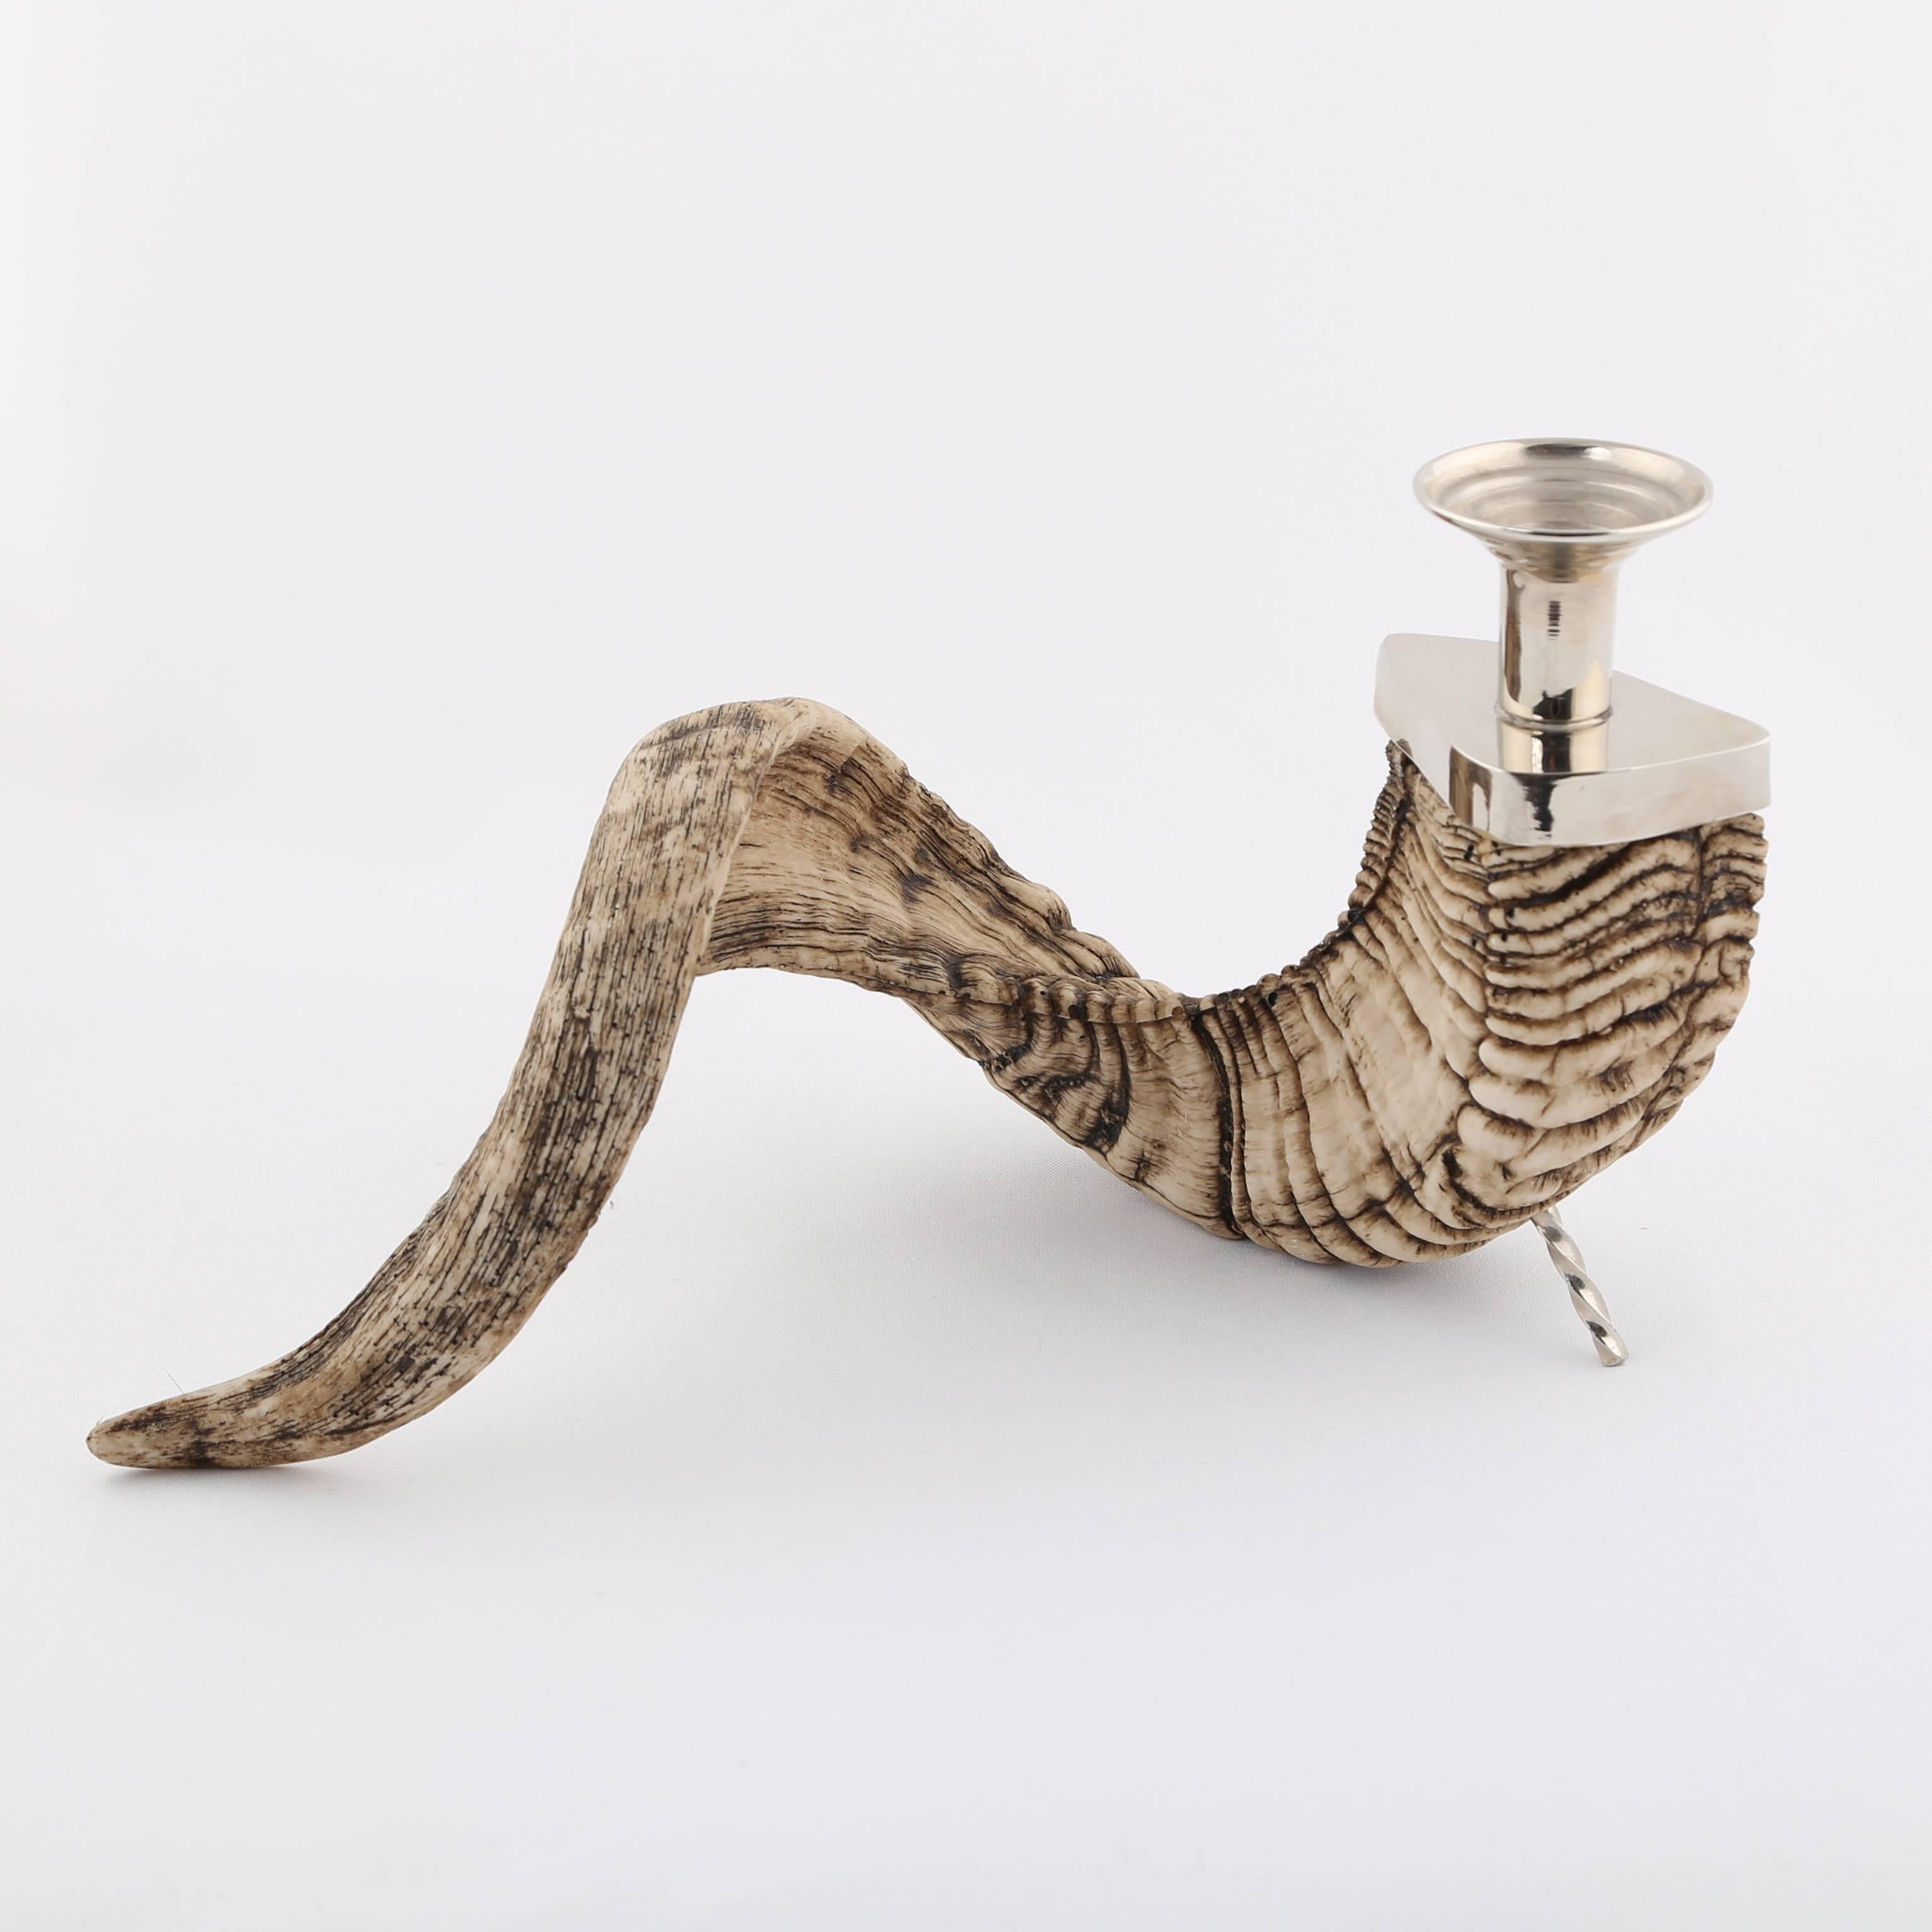 Polished Ram's Horn Candle Holder with Nickel Fittings, circa 1970s For Sale